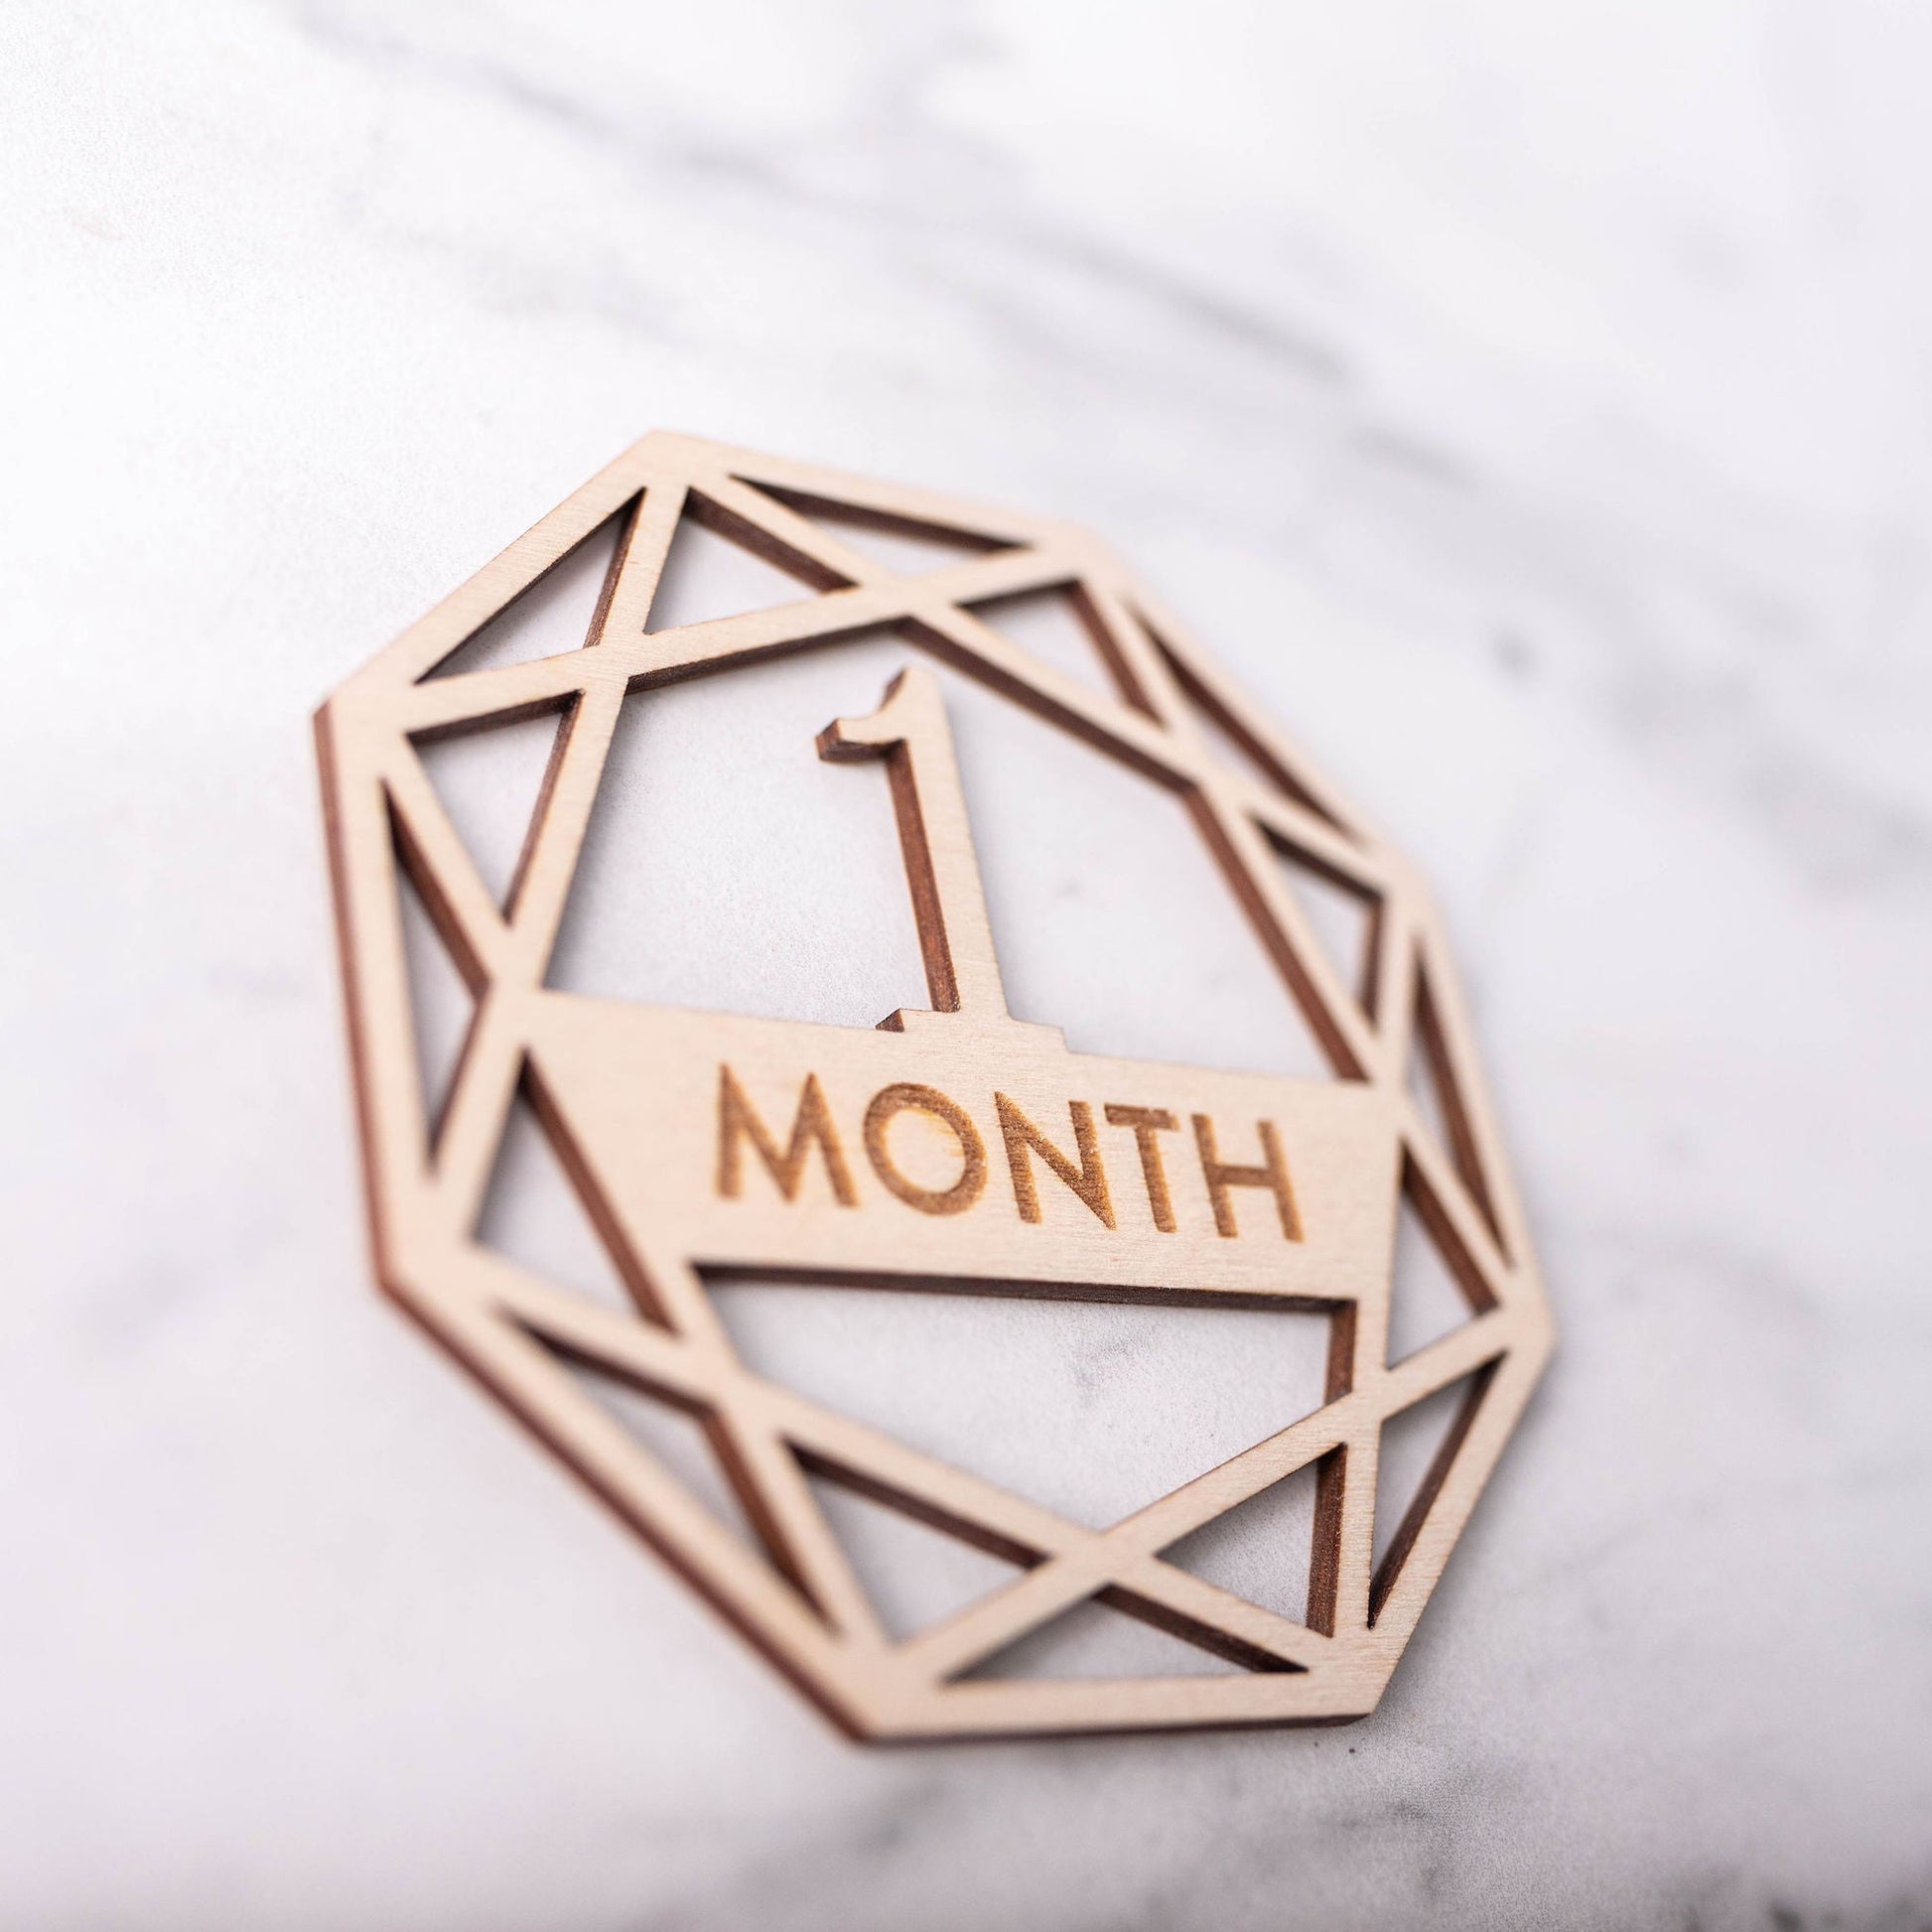 Wooden Monthly Milestone Markers - geometric birch plywood - 1 month - by LeeMo Designs in Bend Oregon